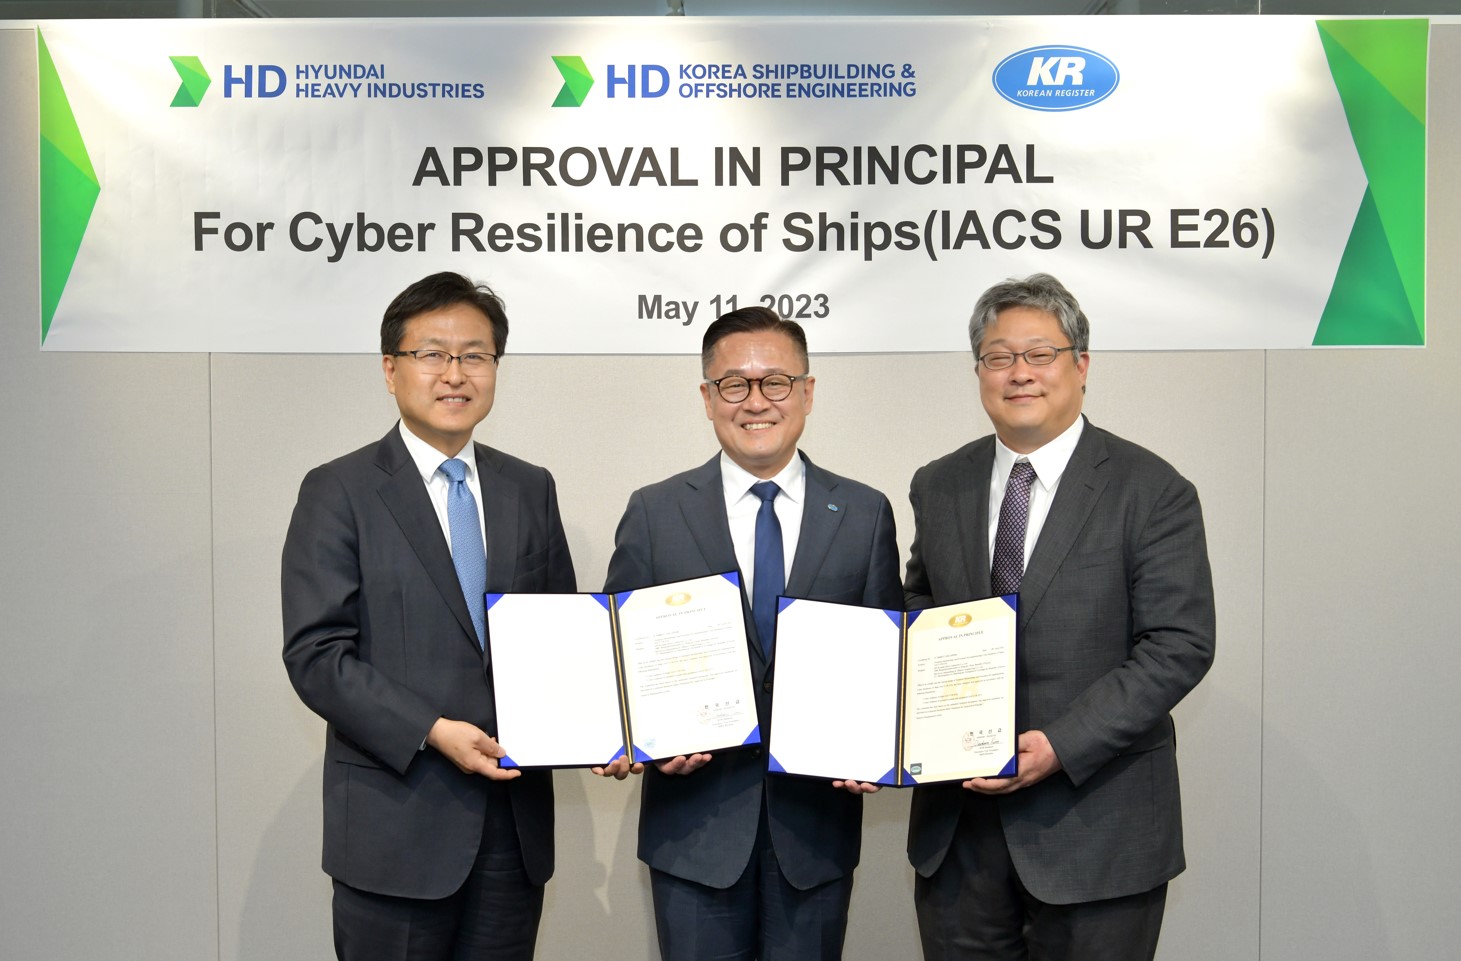 KR Awards AIP to HD Hyundai’s Ship Cyber Resilience Technology